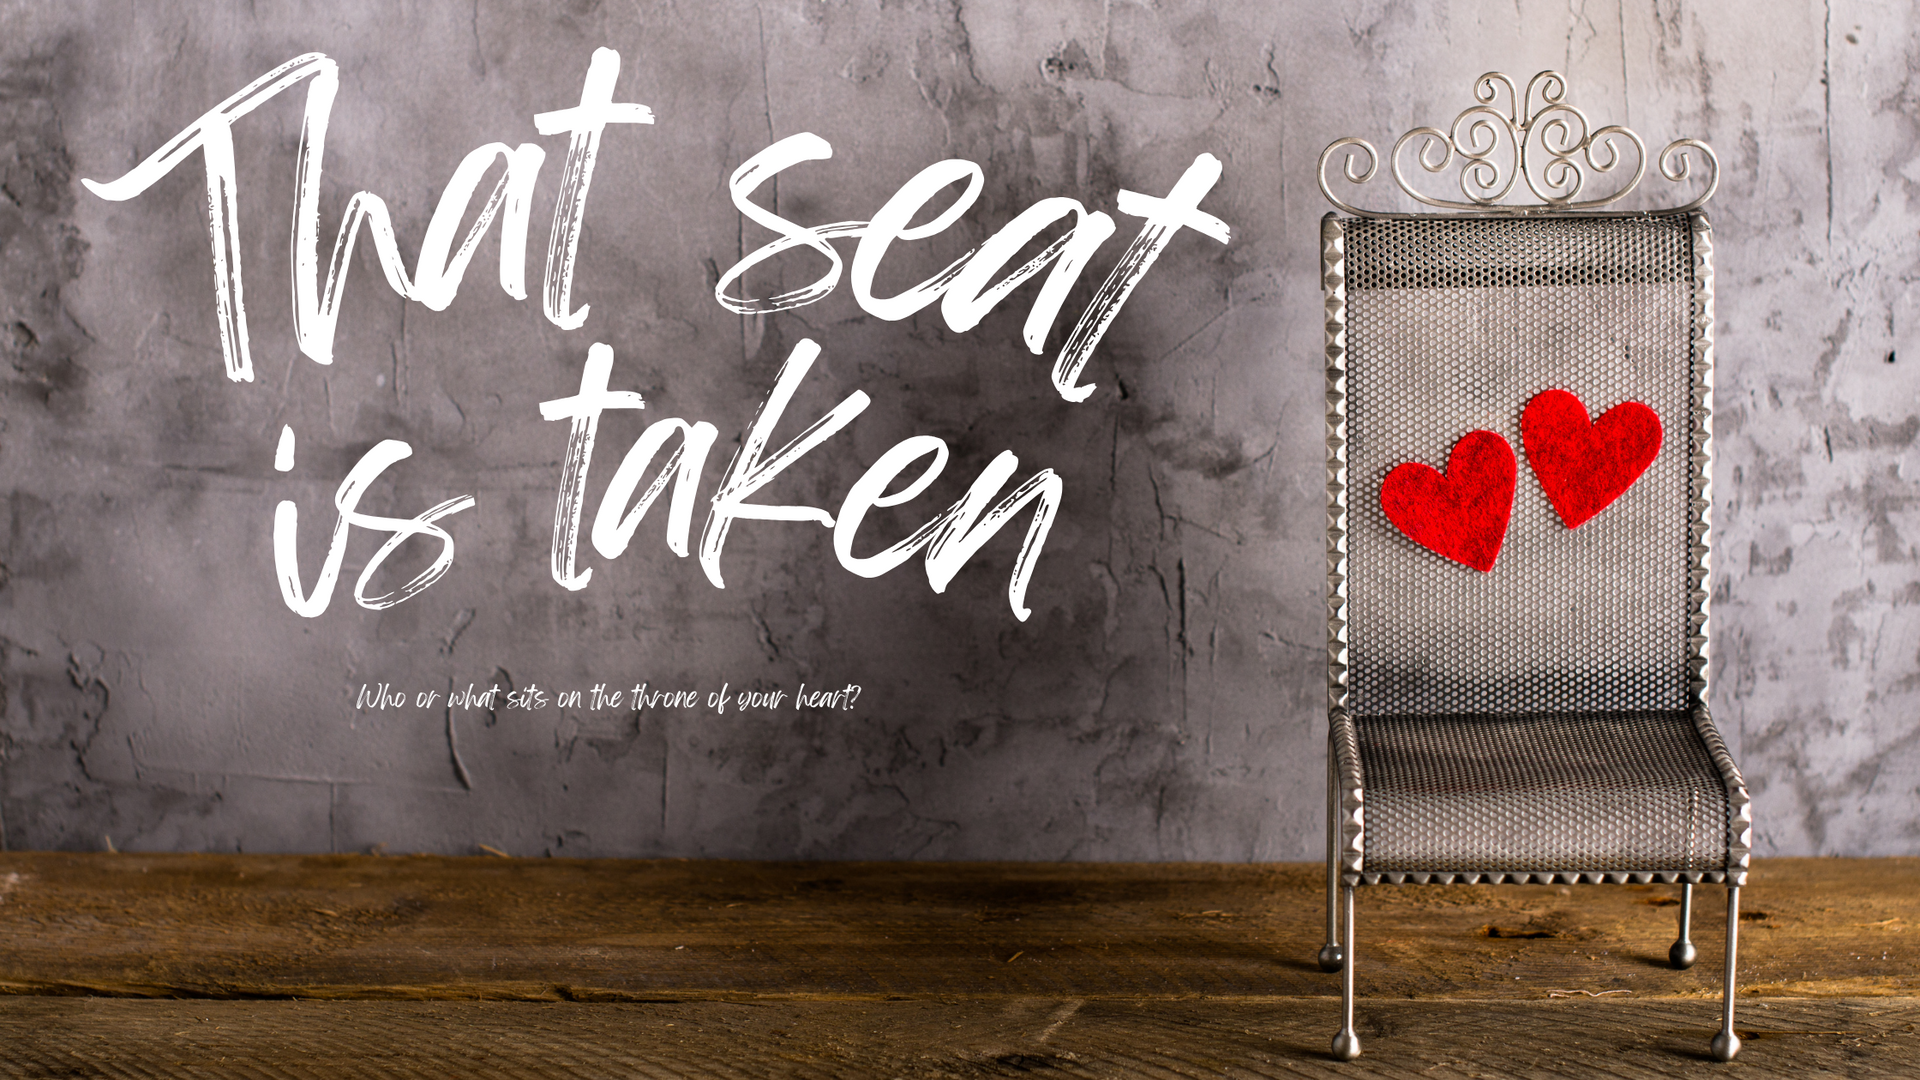 That Seat is Taken: Who Sits on the Throne of Your Heart?